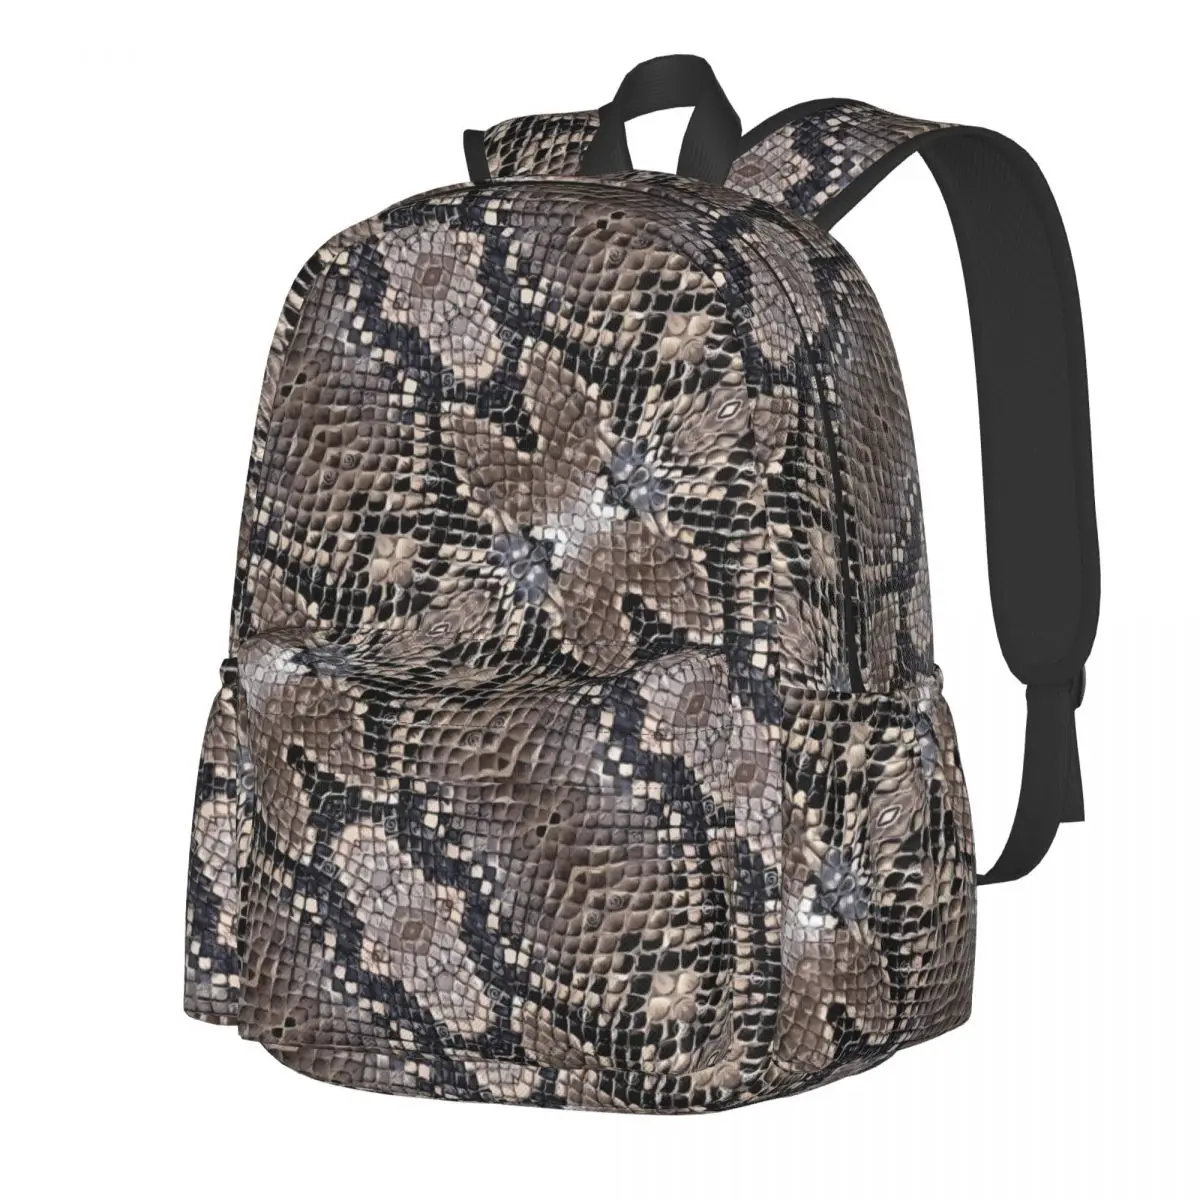 

Snakeskin Print Backpack Greys and Silvers Travel Backpacks Youth Colorful Large School Bags Novelty Rucksack